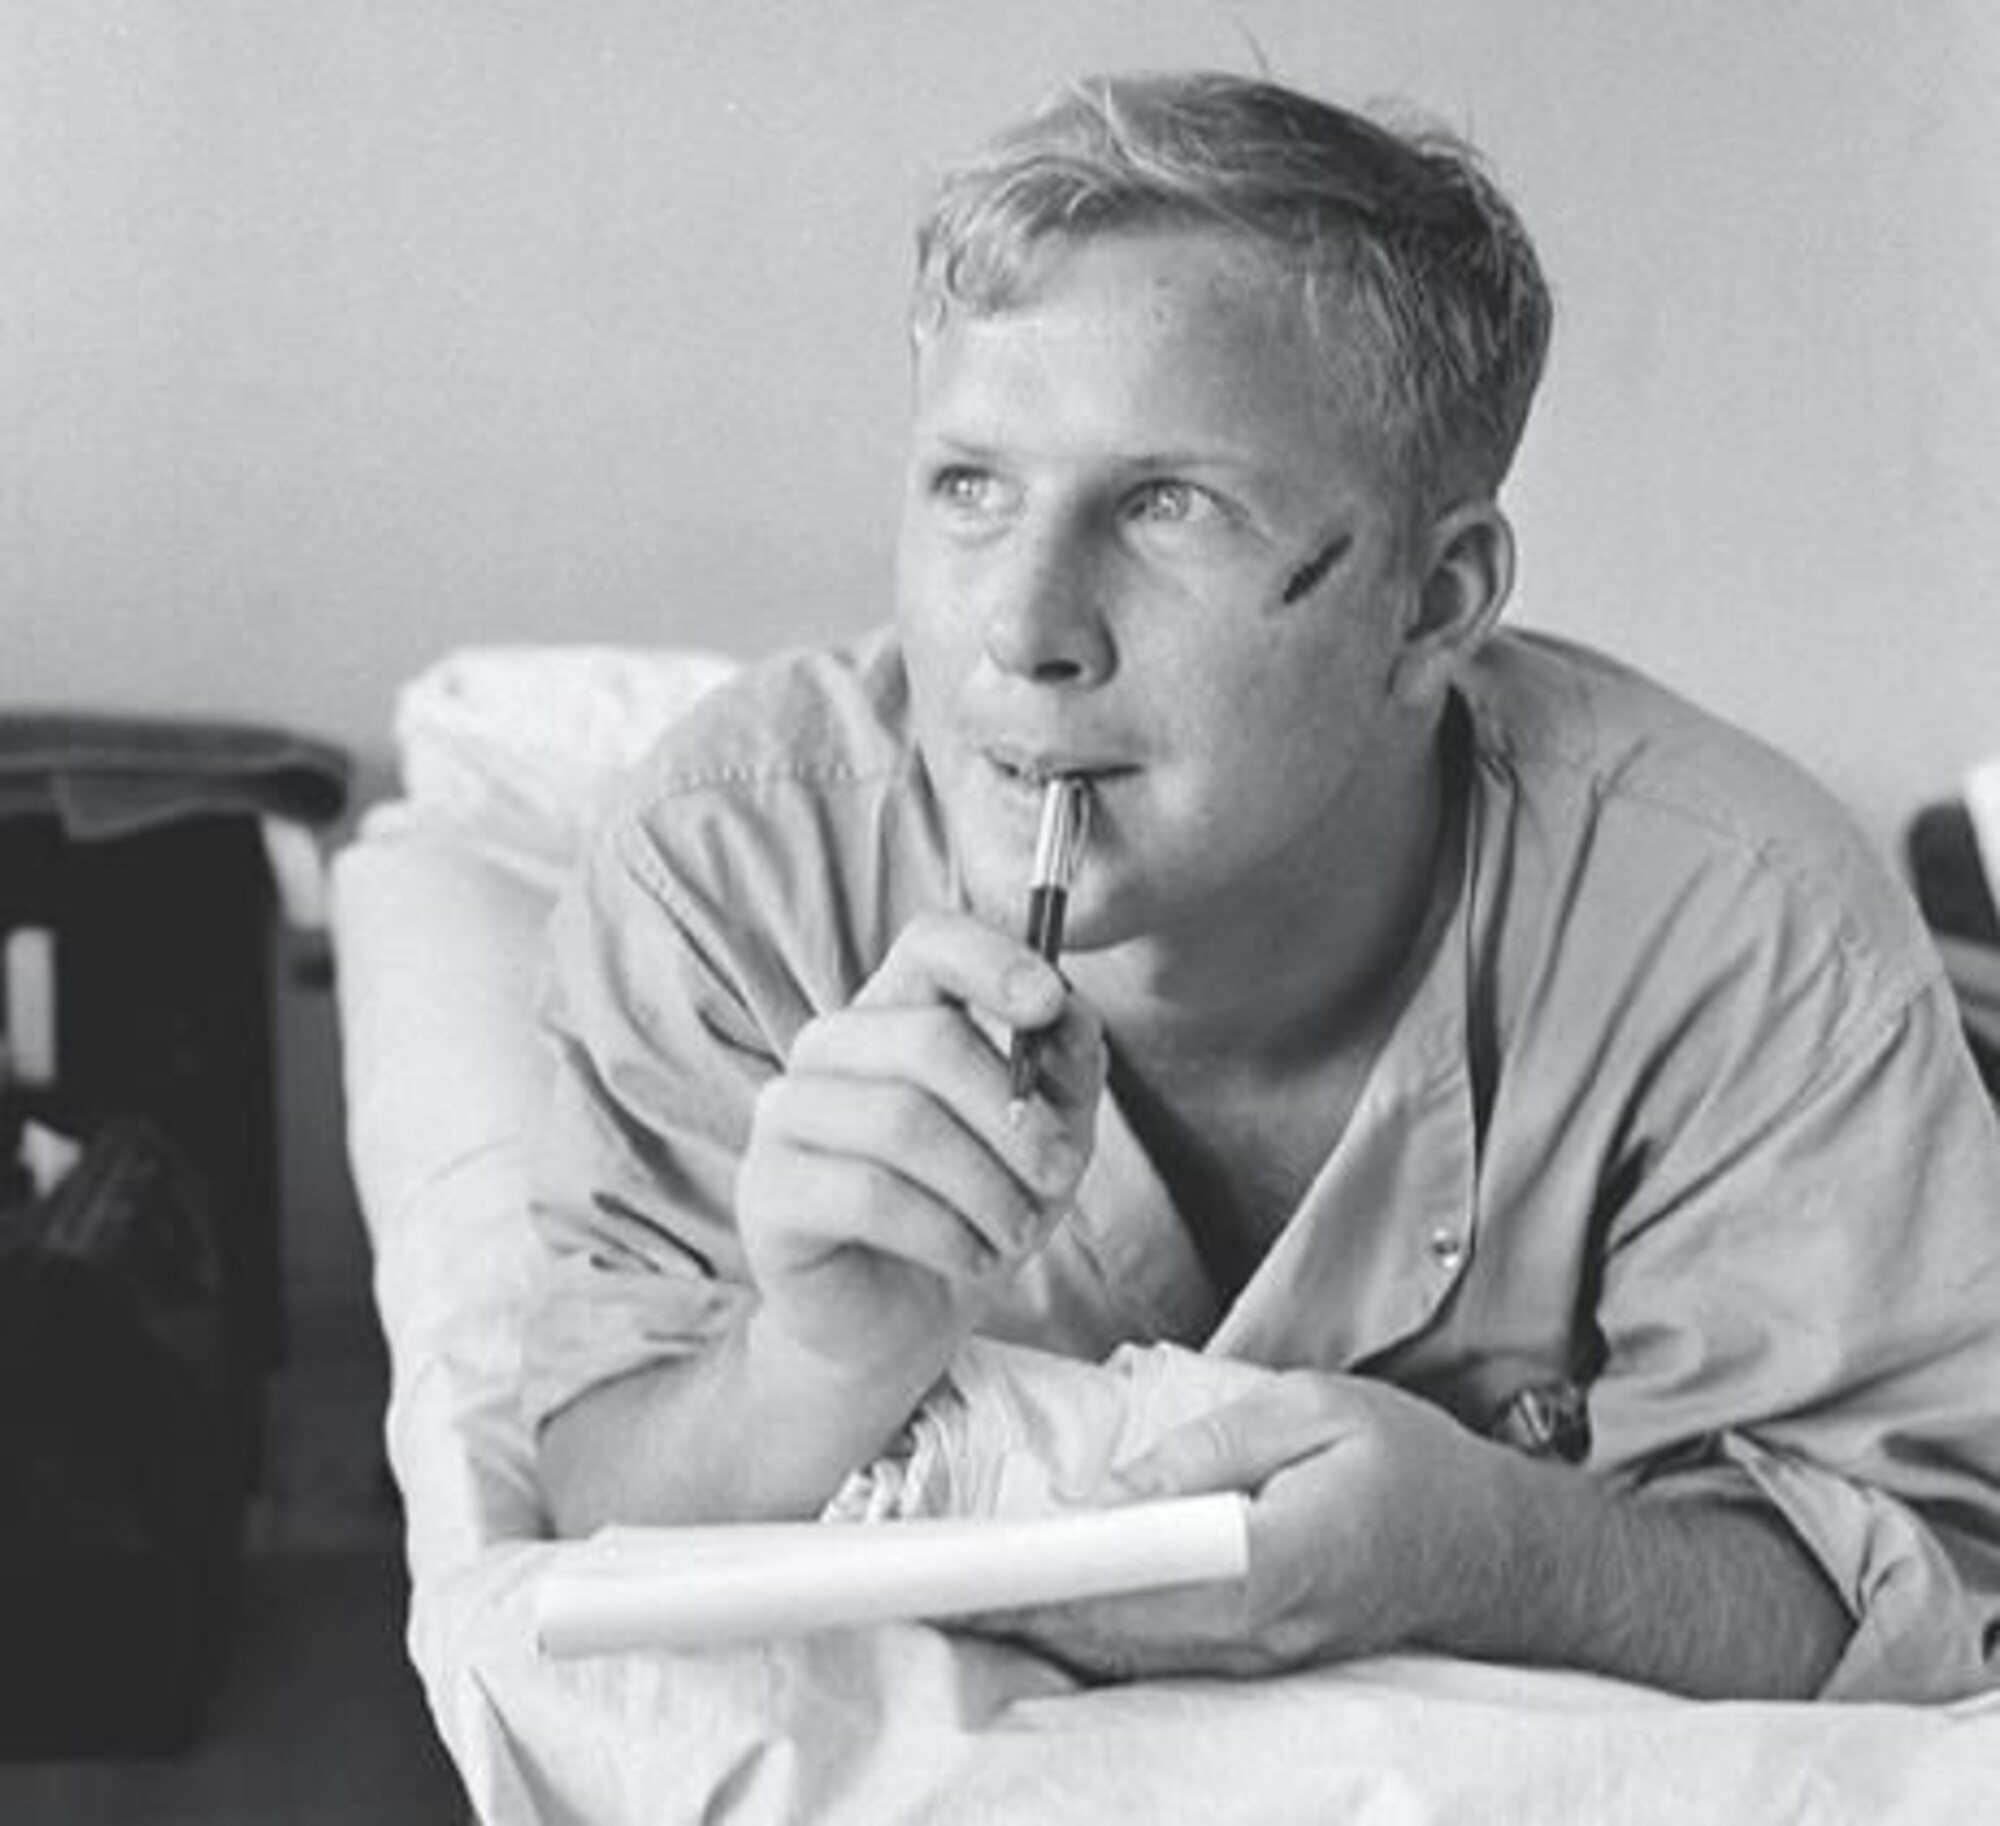 Army medic Thomas Cole writes a letter home while recovering from a head wound at the Third Field Hospital in Saigon on Feb. 19, 1966. Cole made national headlines when a photo of him appeared on the cover of Life magazine. That photo is on the cover of this month’s VFW. (Photo by Henri Huet/AP)